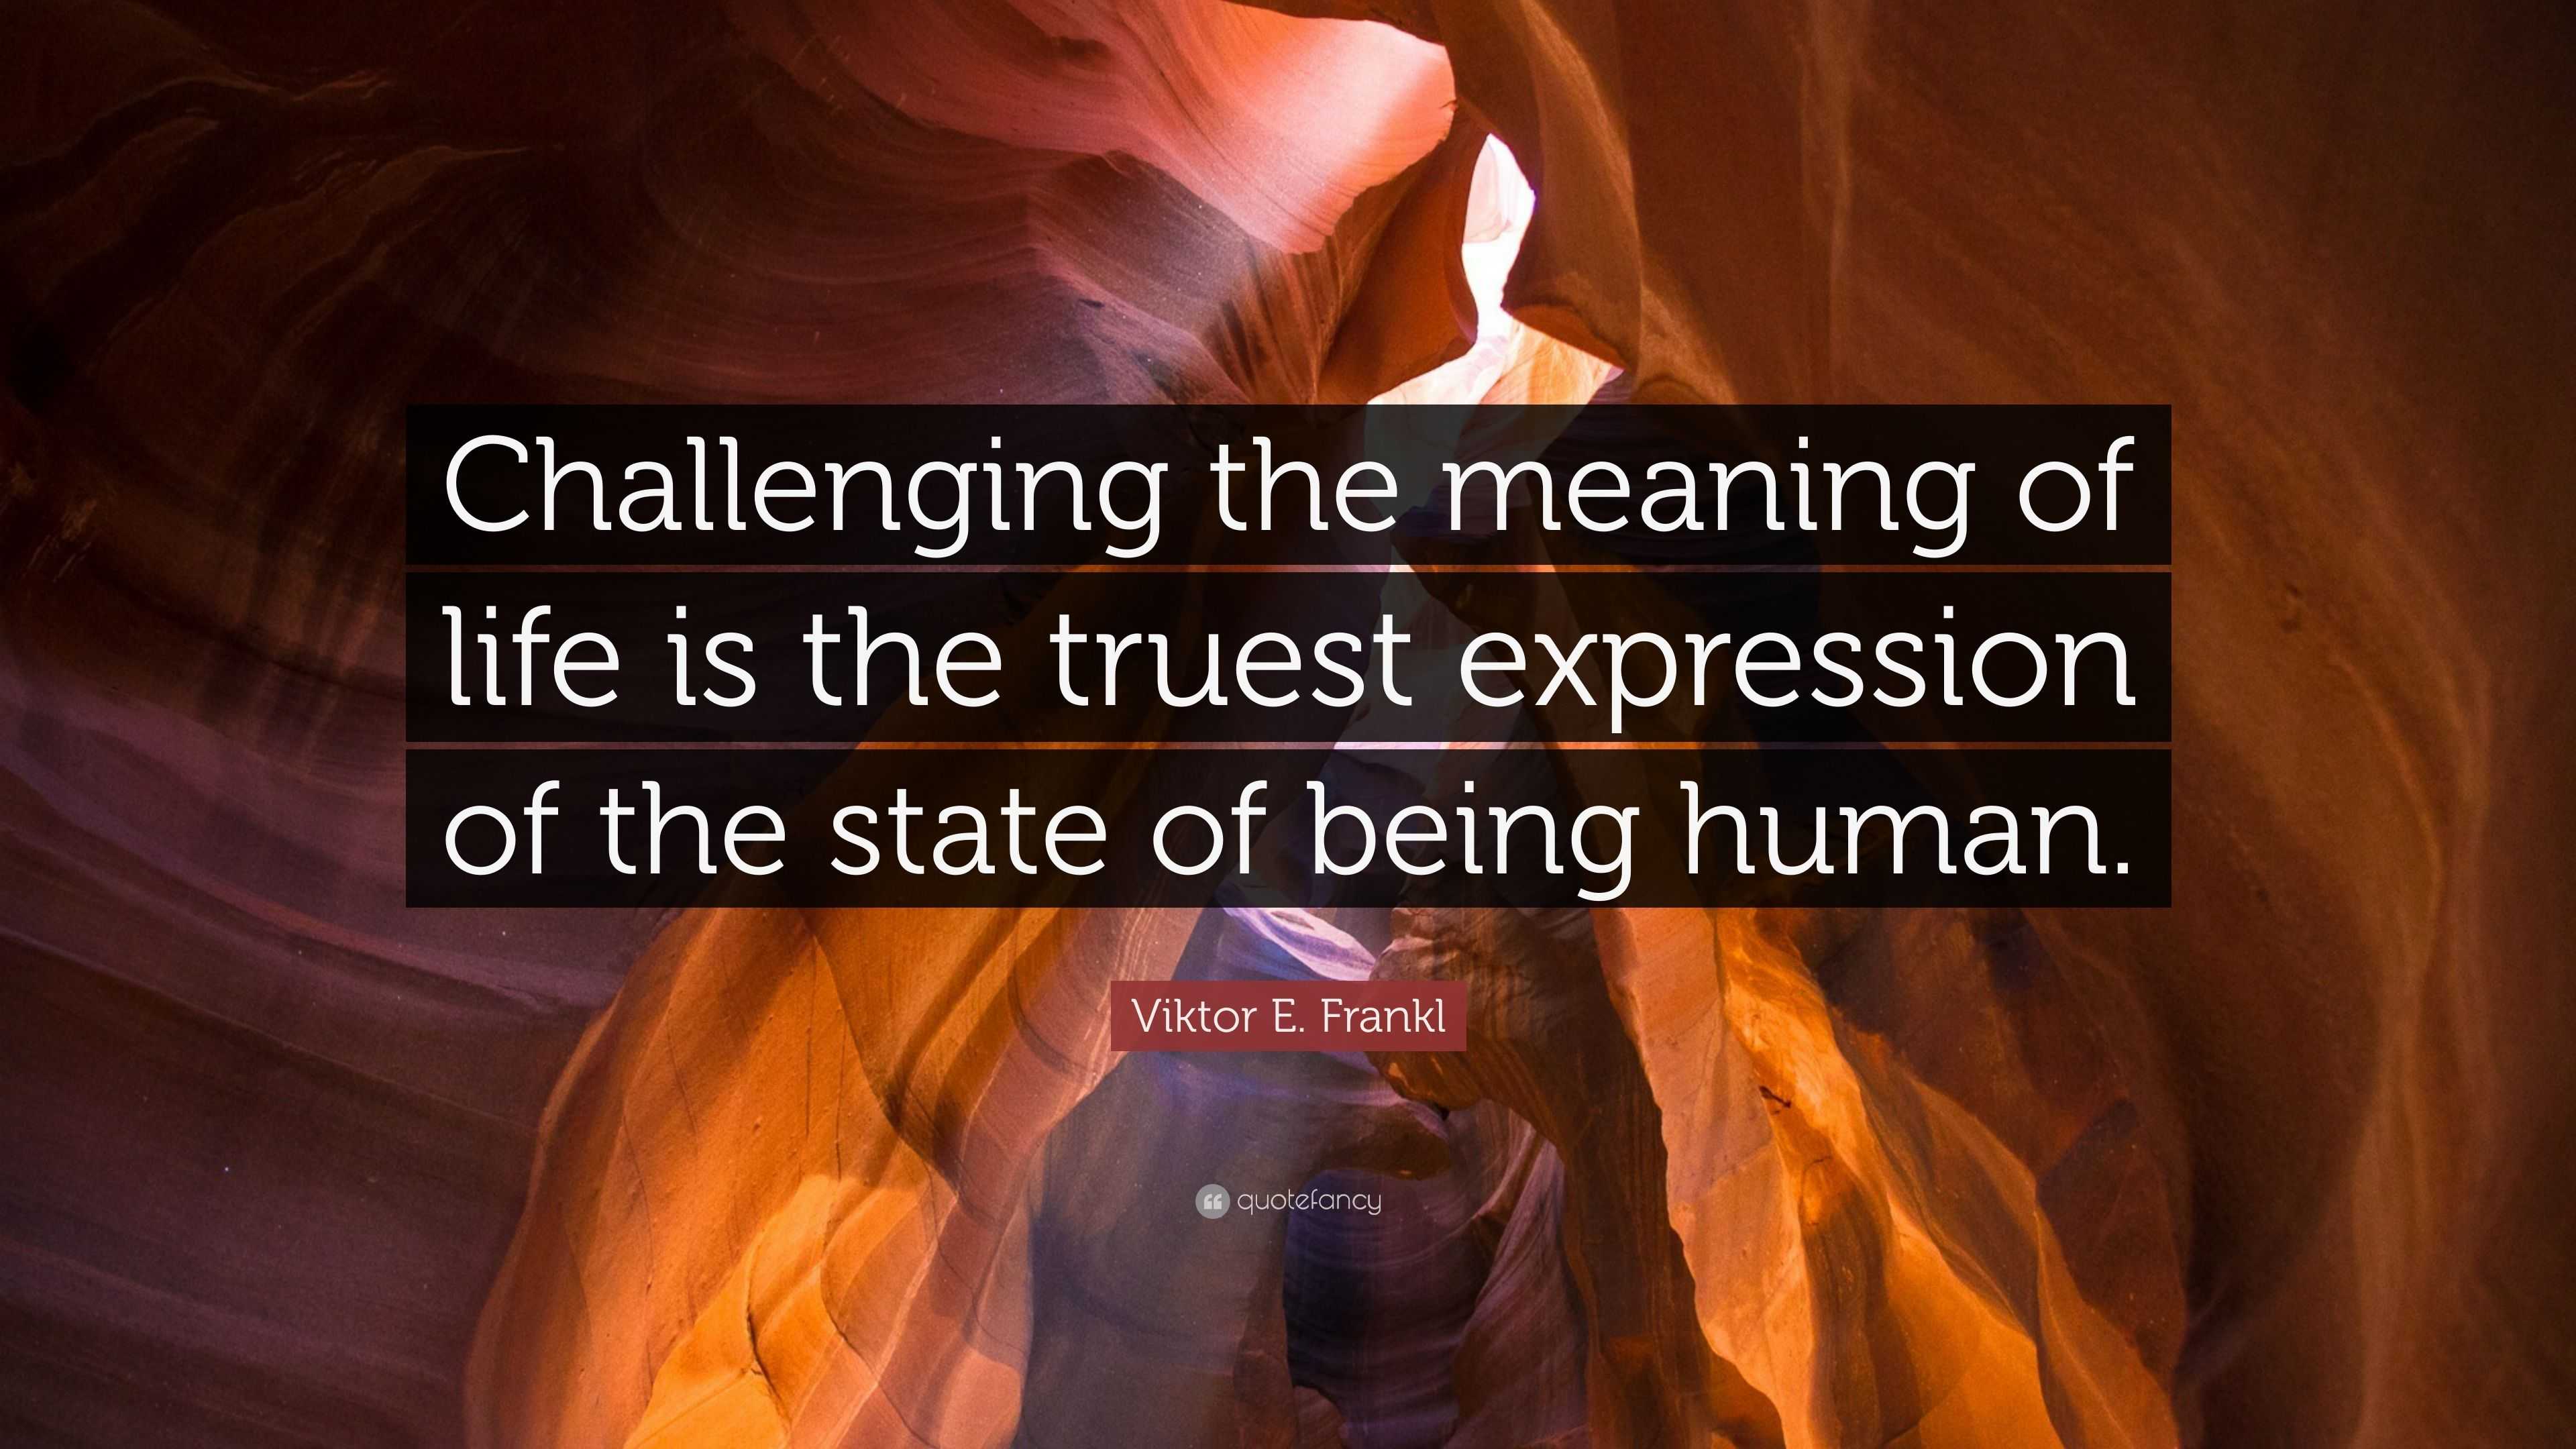 Viktor E Frankl Quote “Challenging the meaning of life is the truest expression